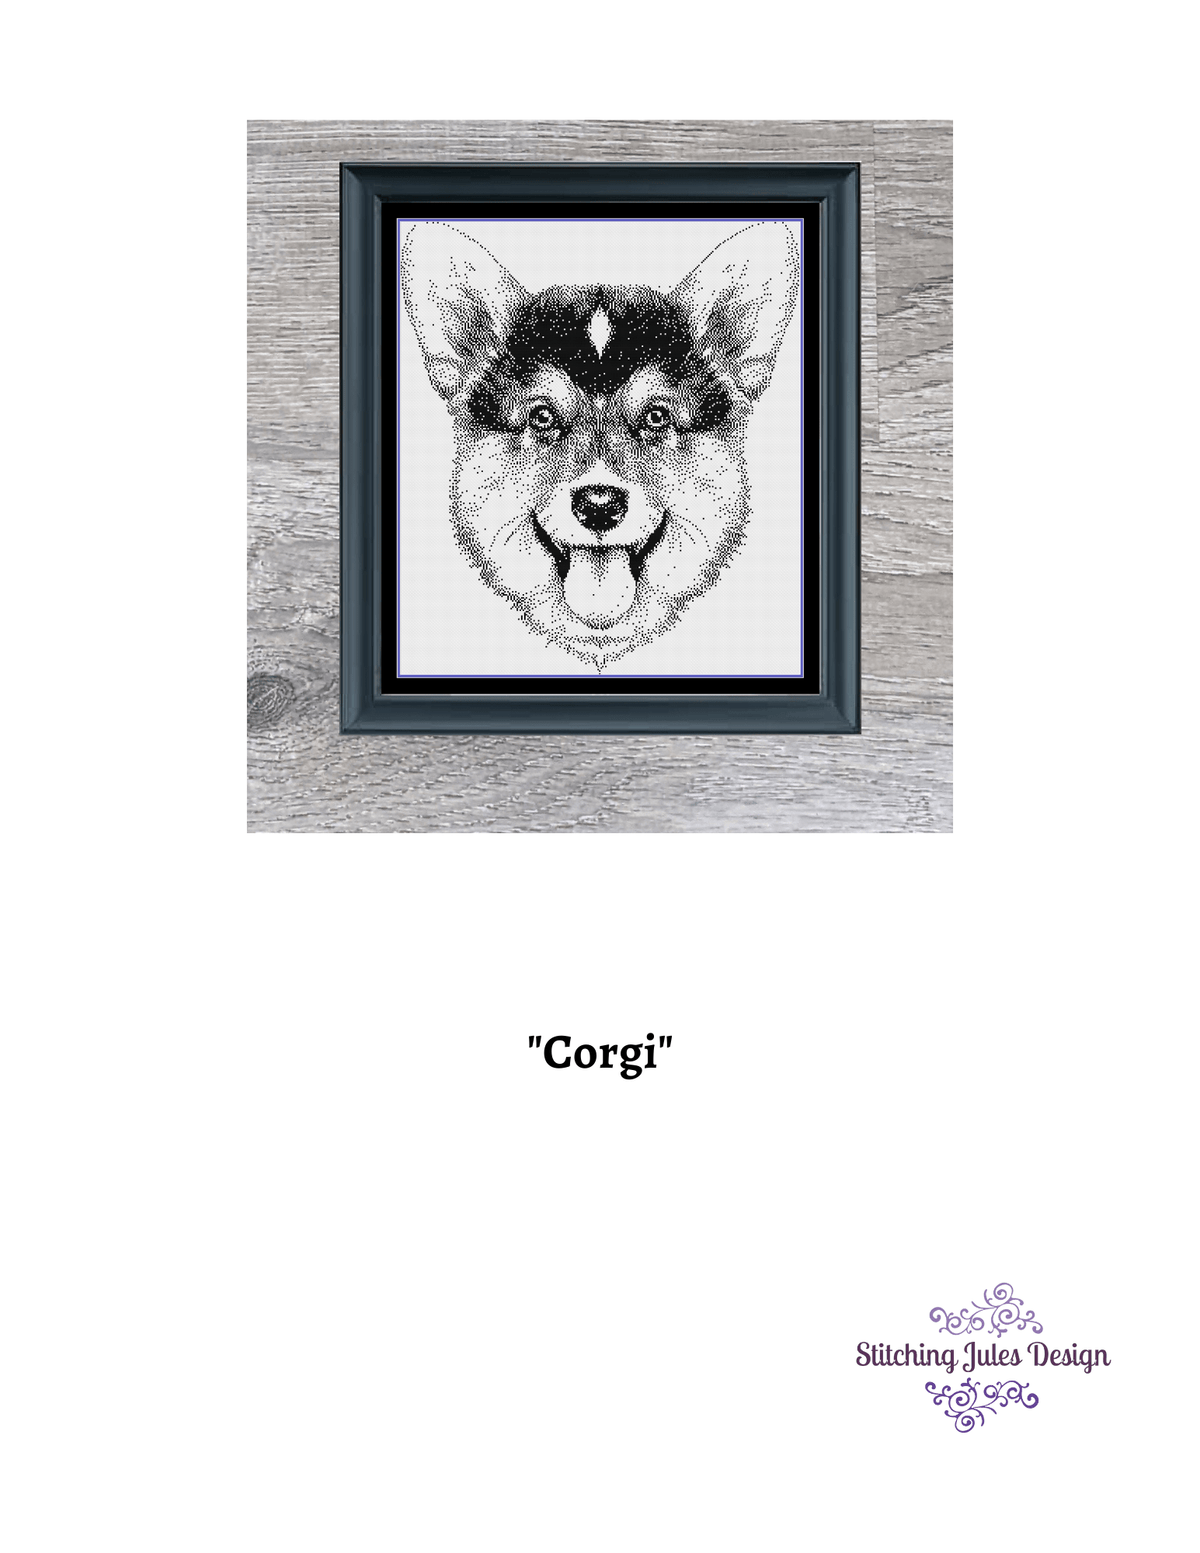 Stitching Jules Design Cross Stitch Pattern Corgi Cross Stitch Pattern | Dog Breed Cross Stitch Pattern | Blackwork | Instant PDF Download And Physical Pattern Options